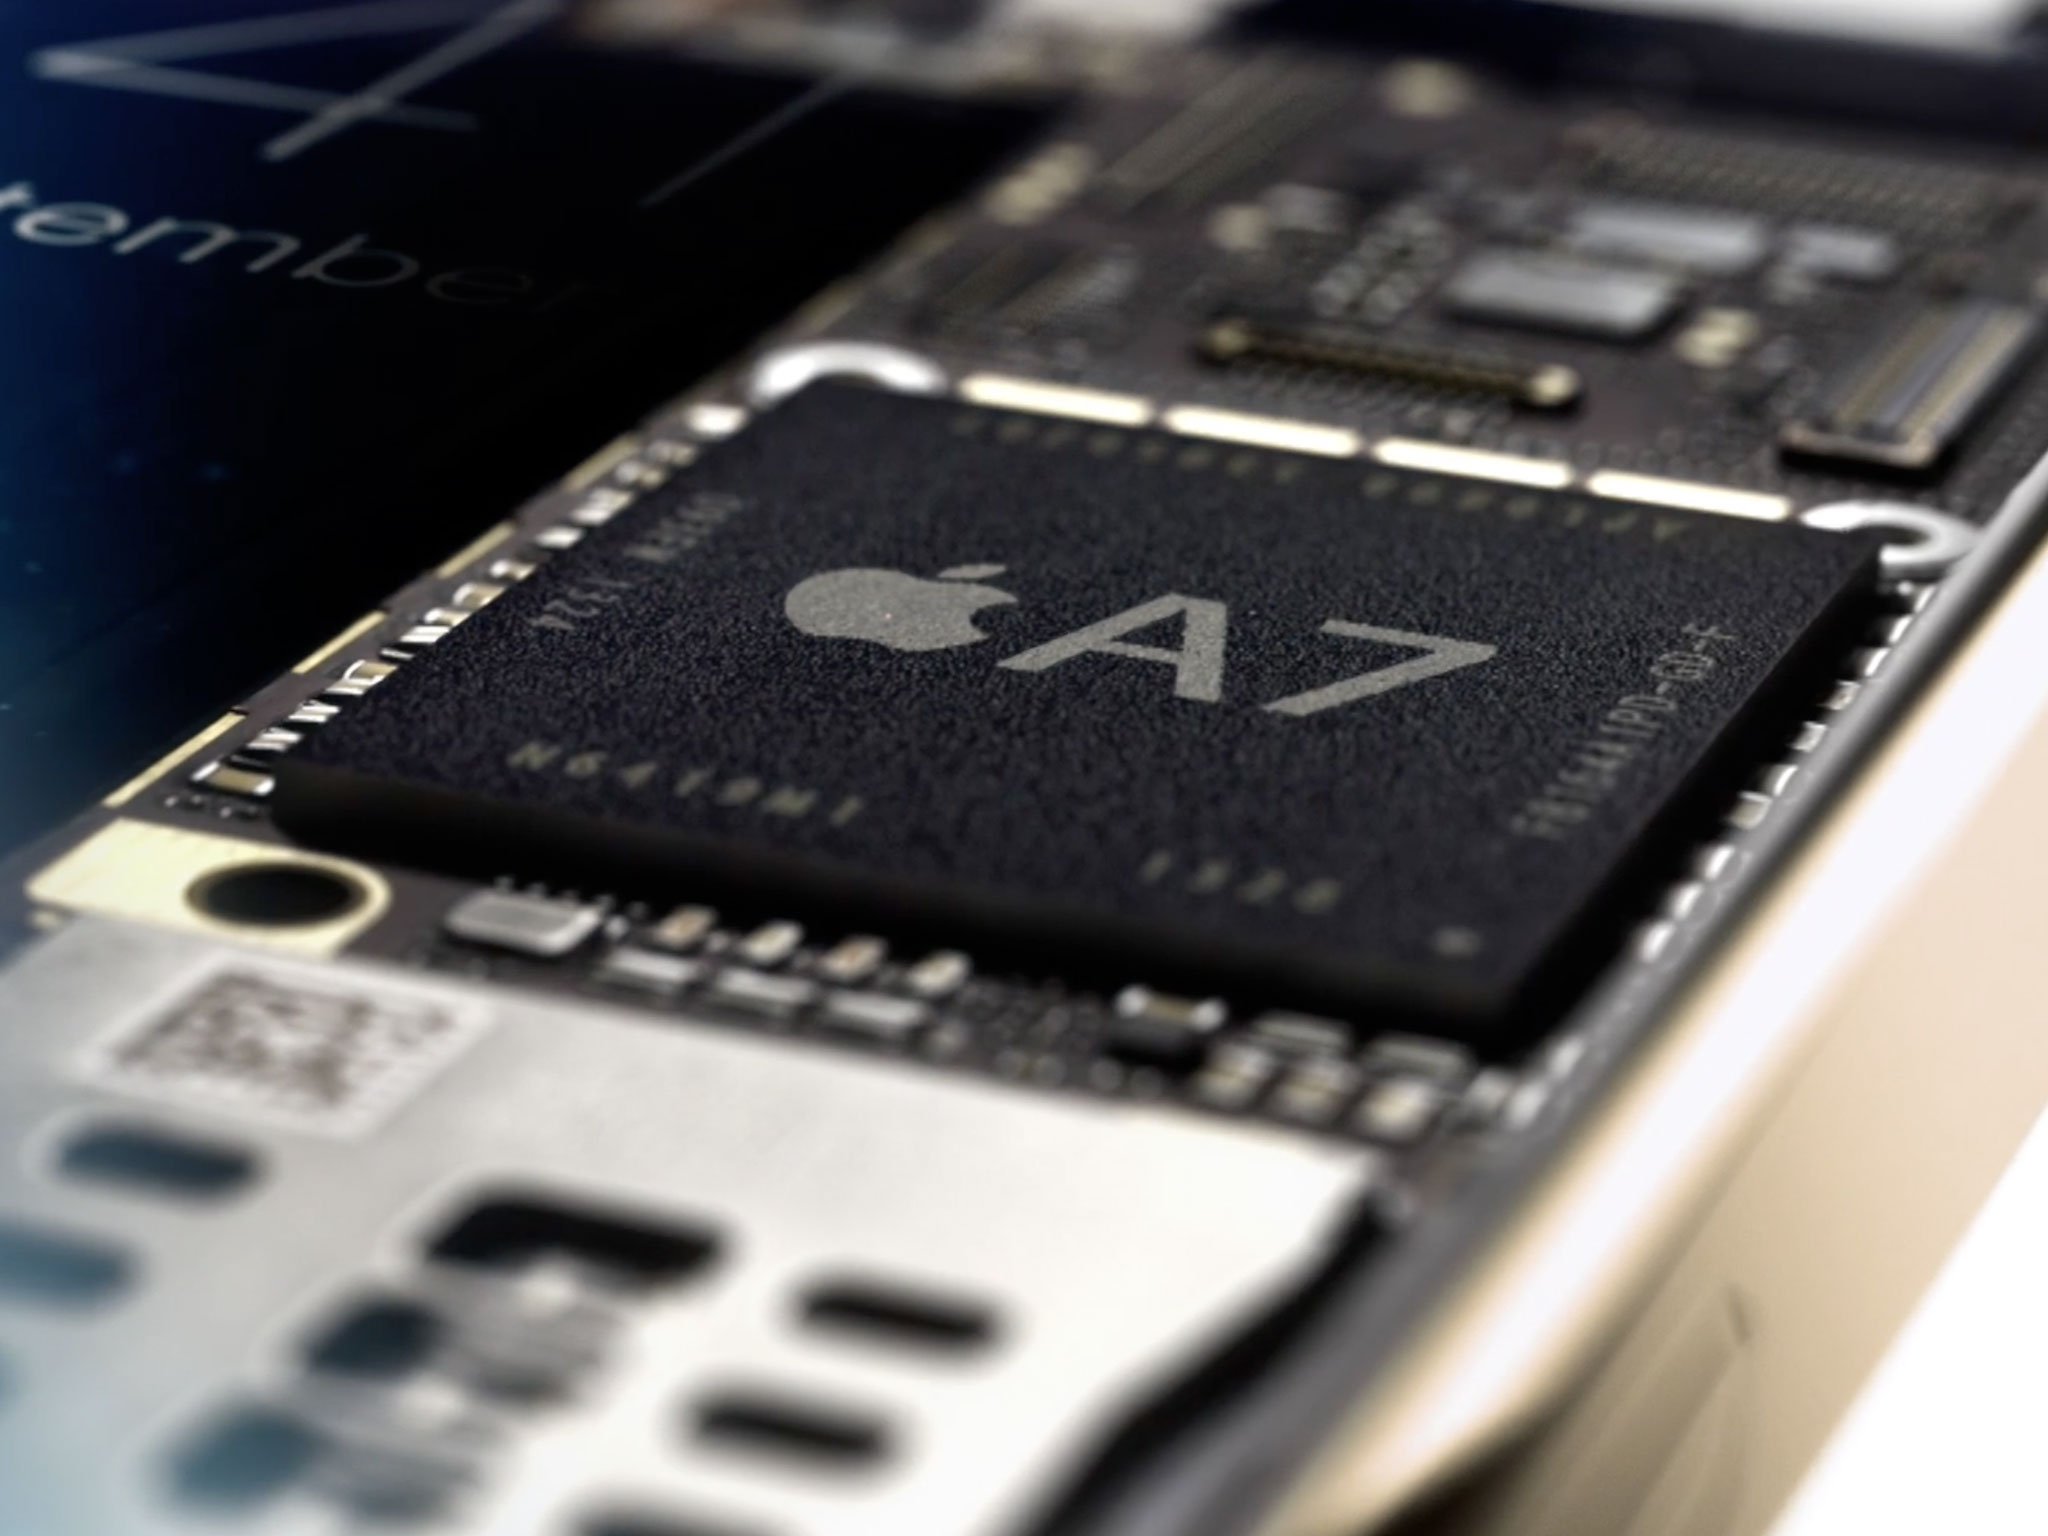 iPhone 5s preview: Apple A7 chipset brings 64-bit, twice the speed, OpenGL ES 3.0 gaming